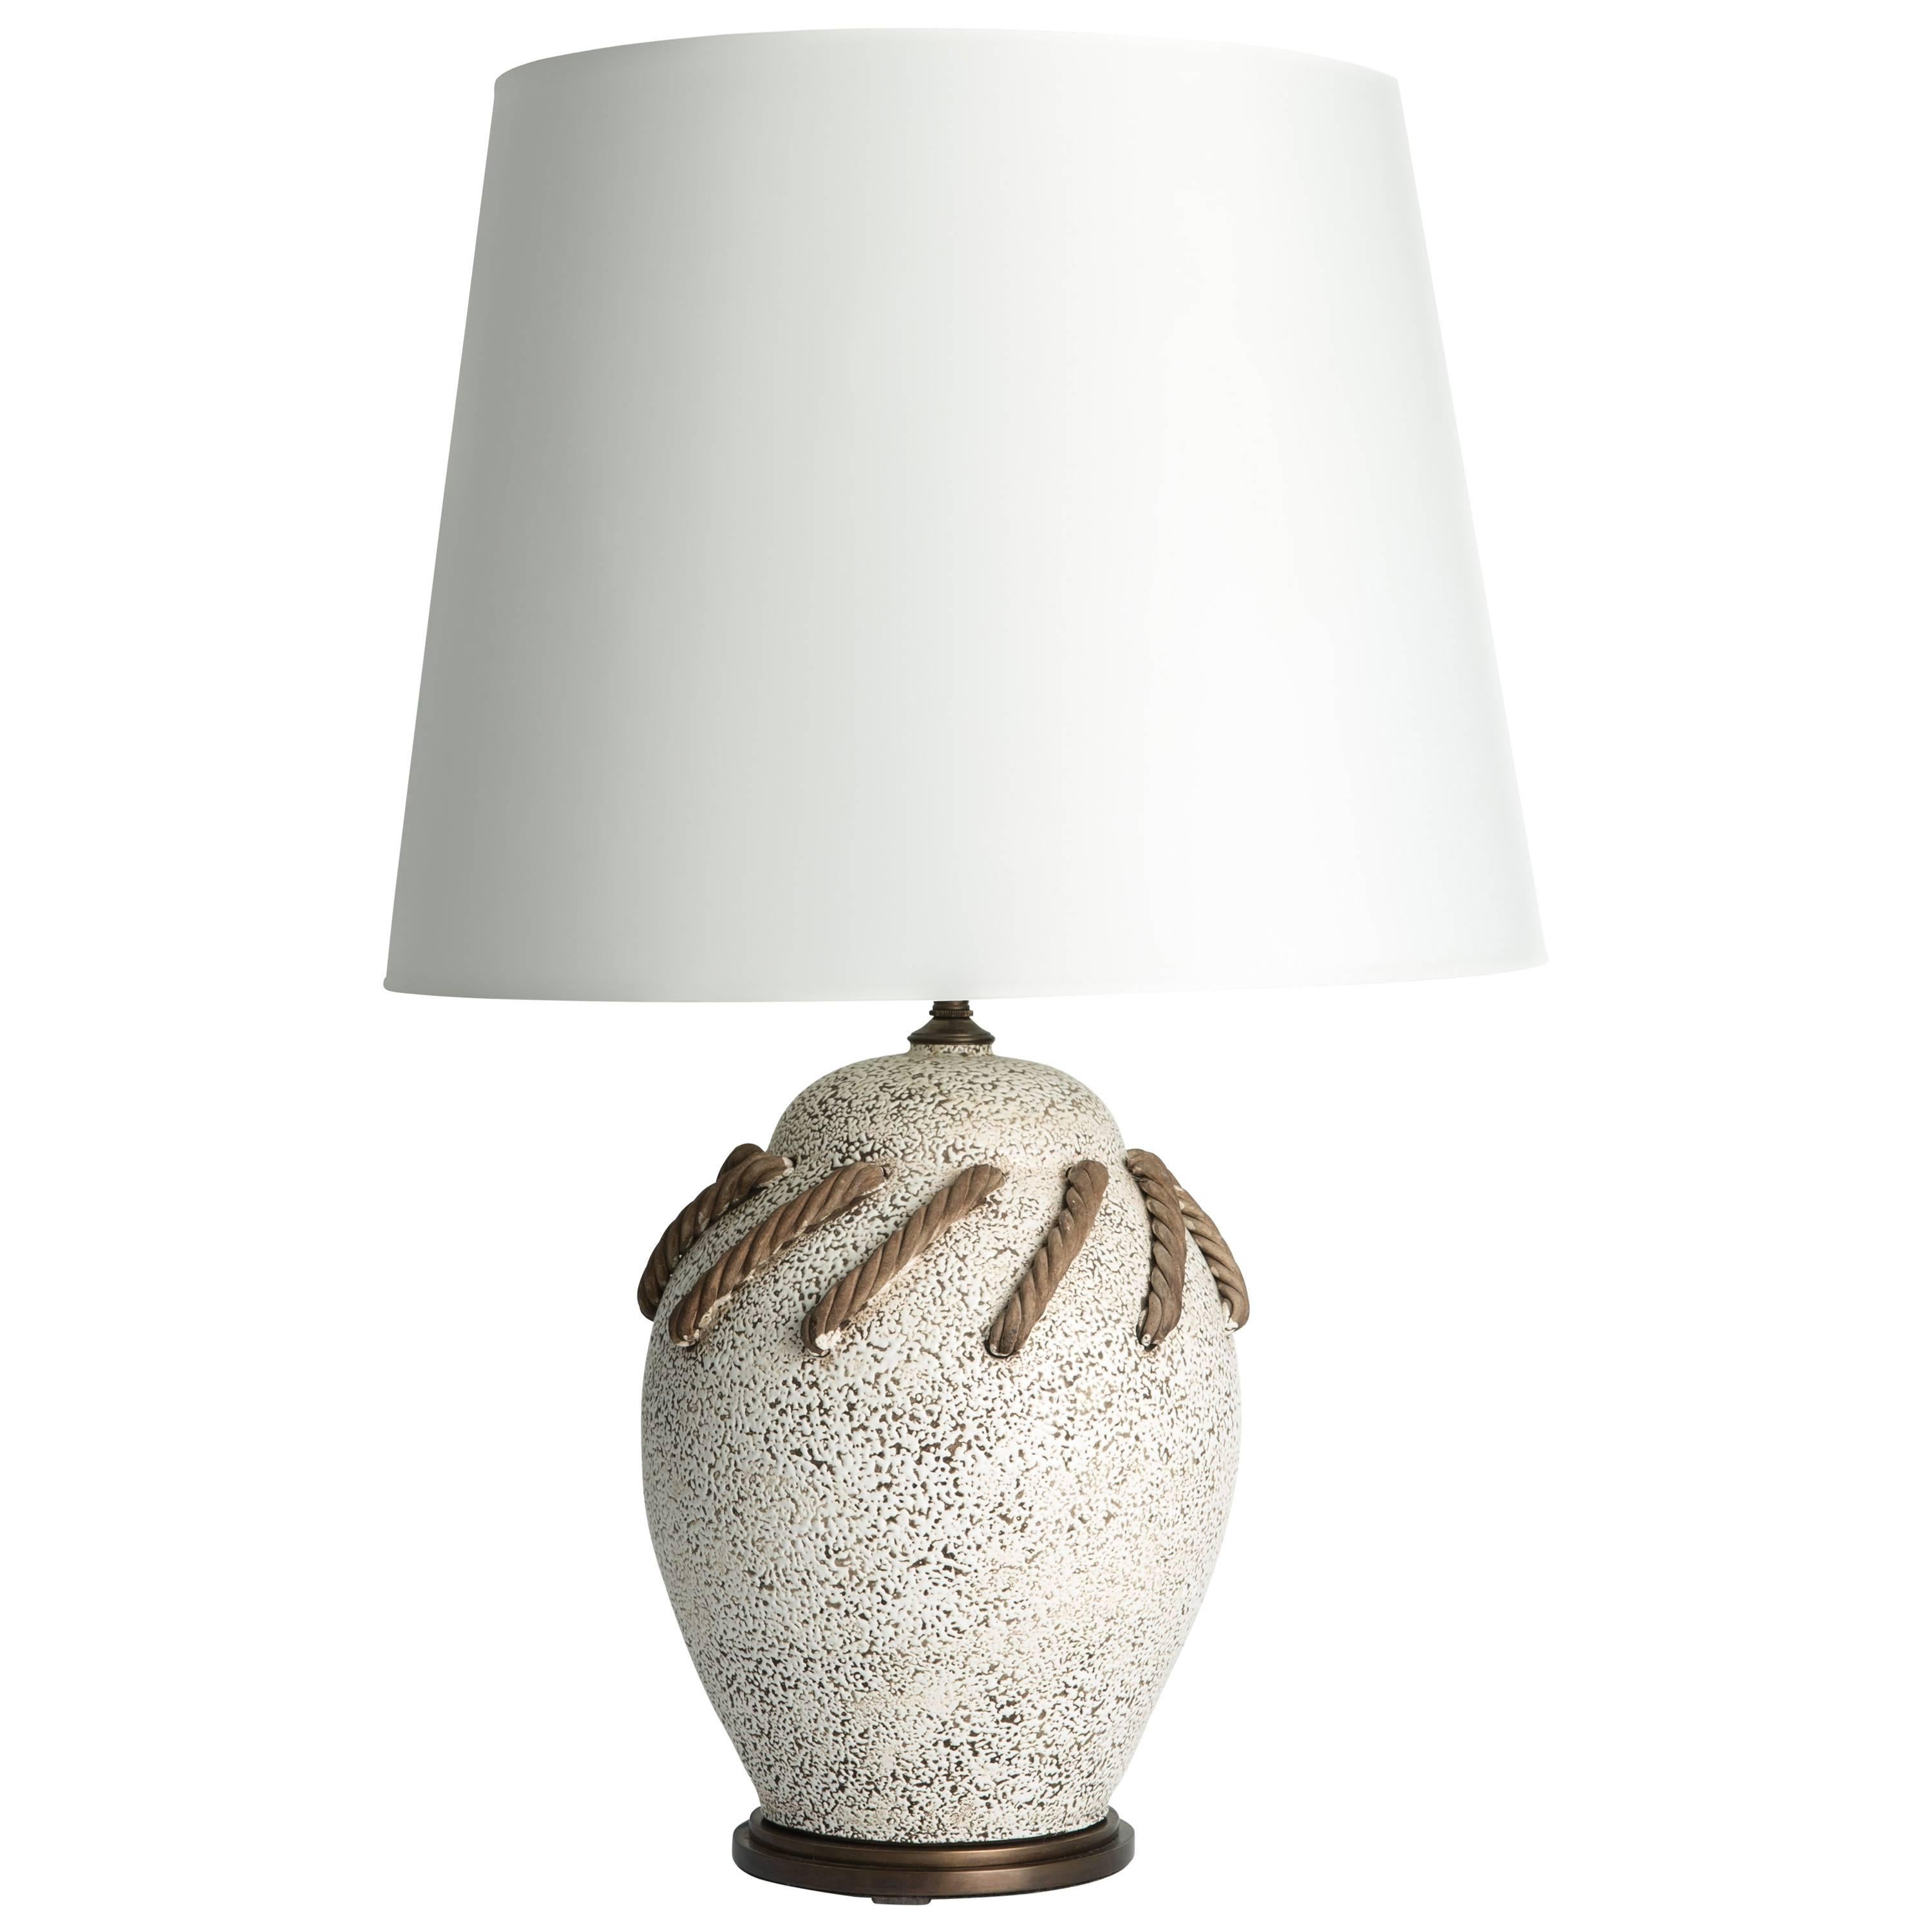 French Ceramic Table Lamp with Rope Motif